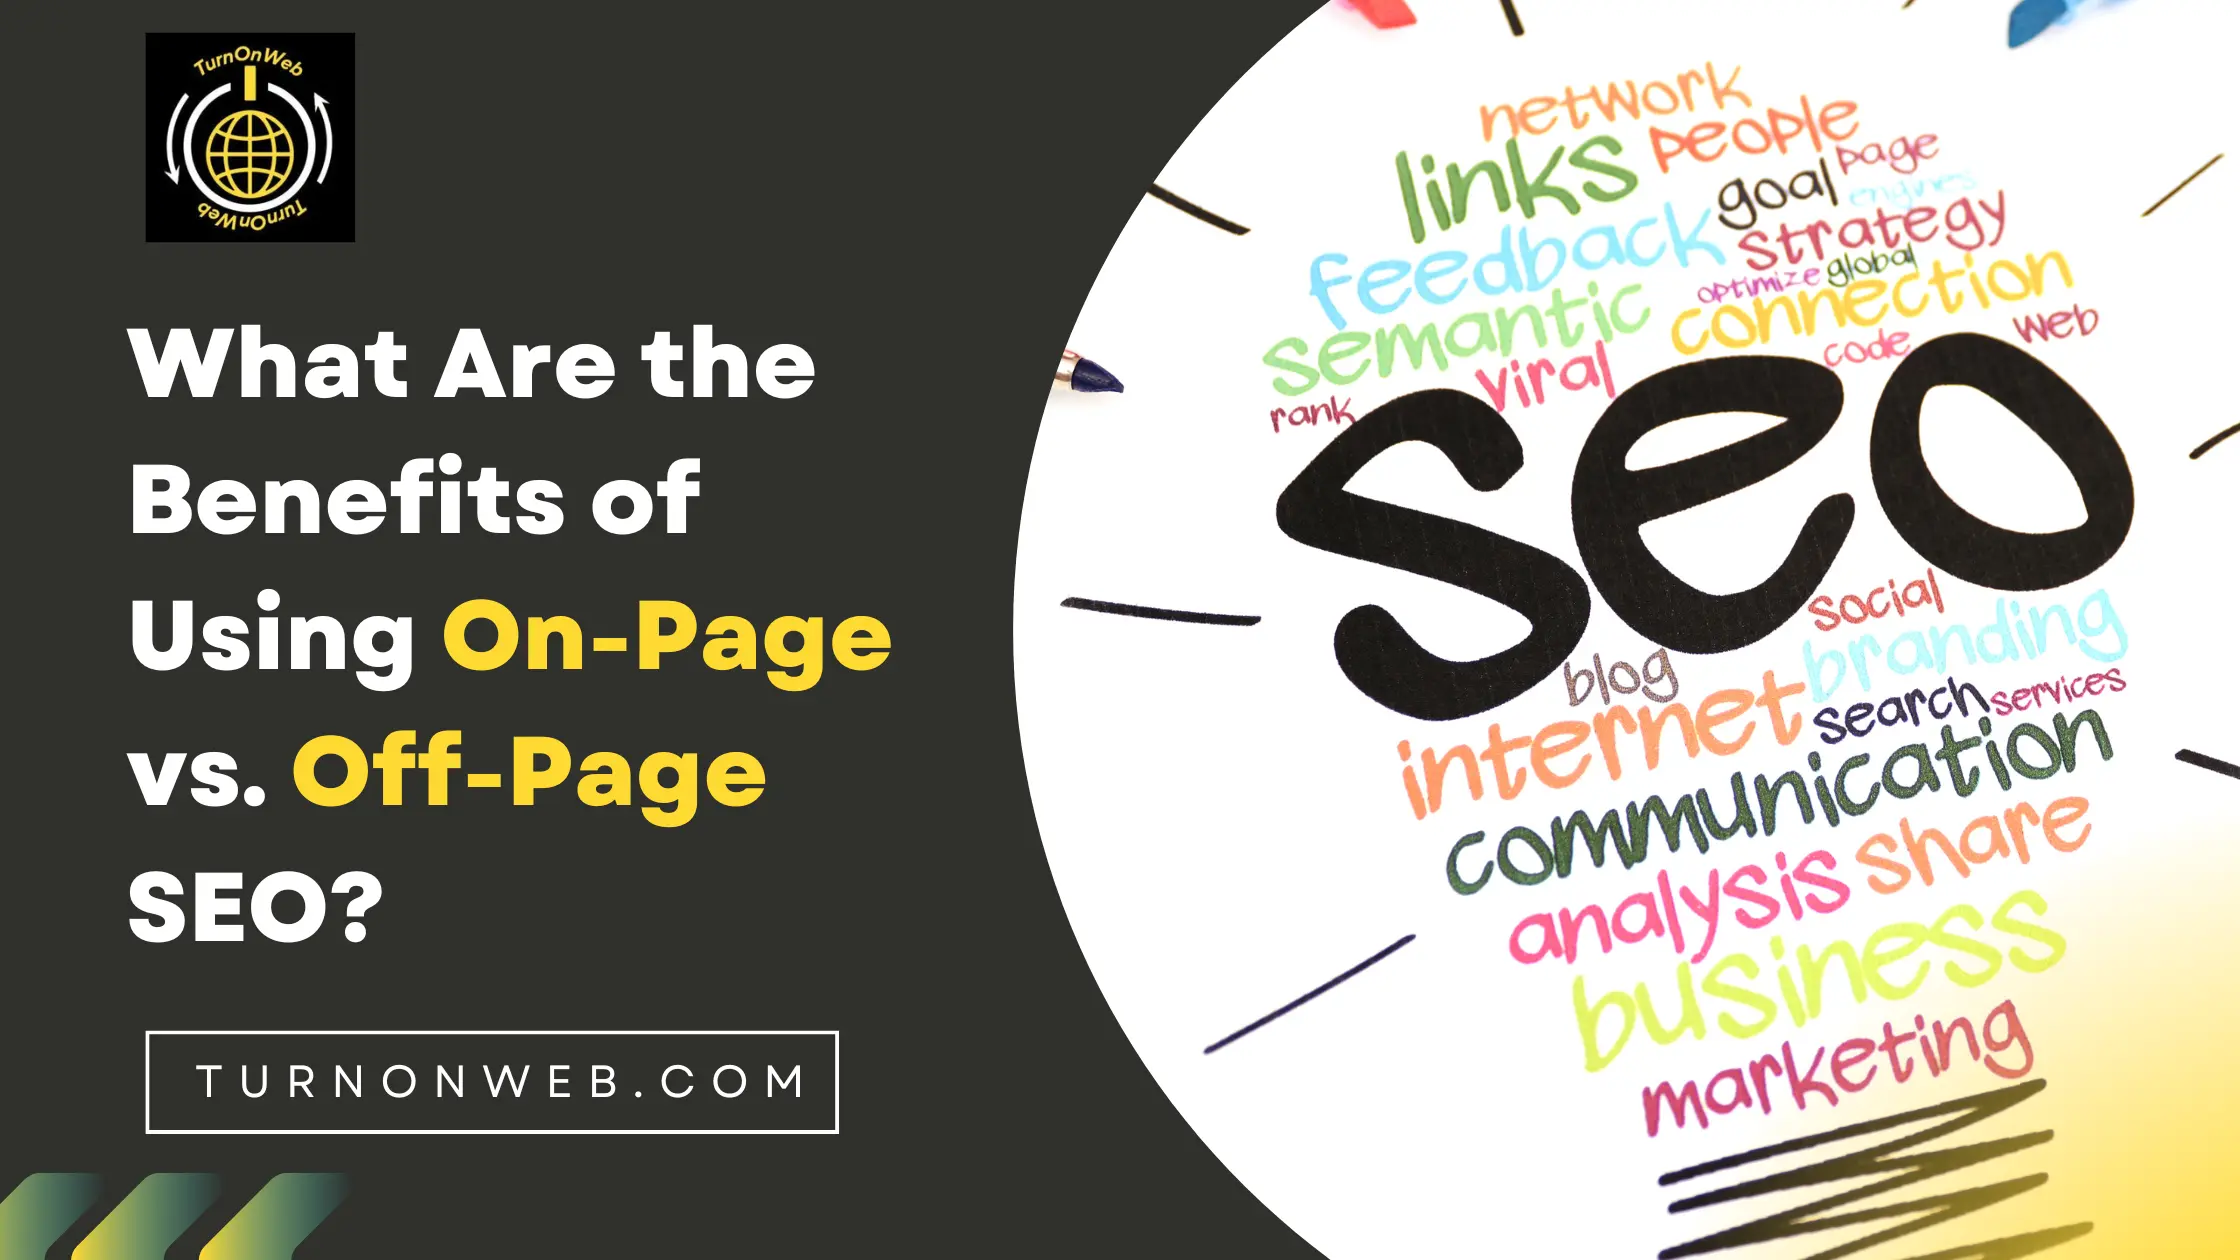 What Are the Benefits of Using On-Page vs. Off-Page SEO?